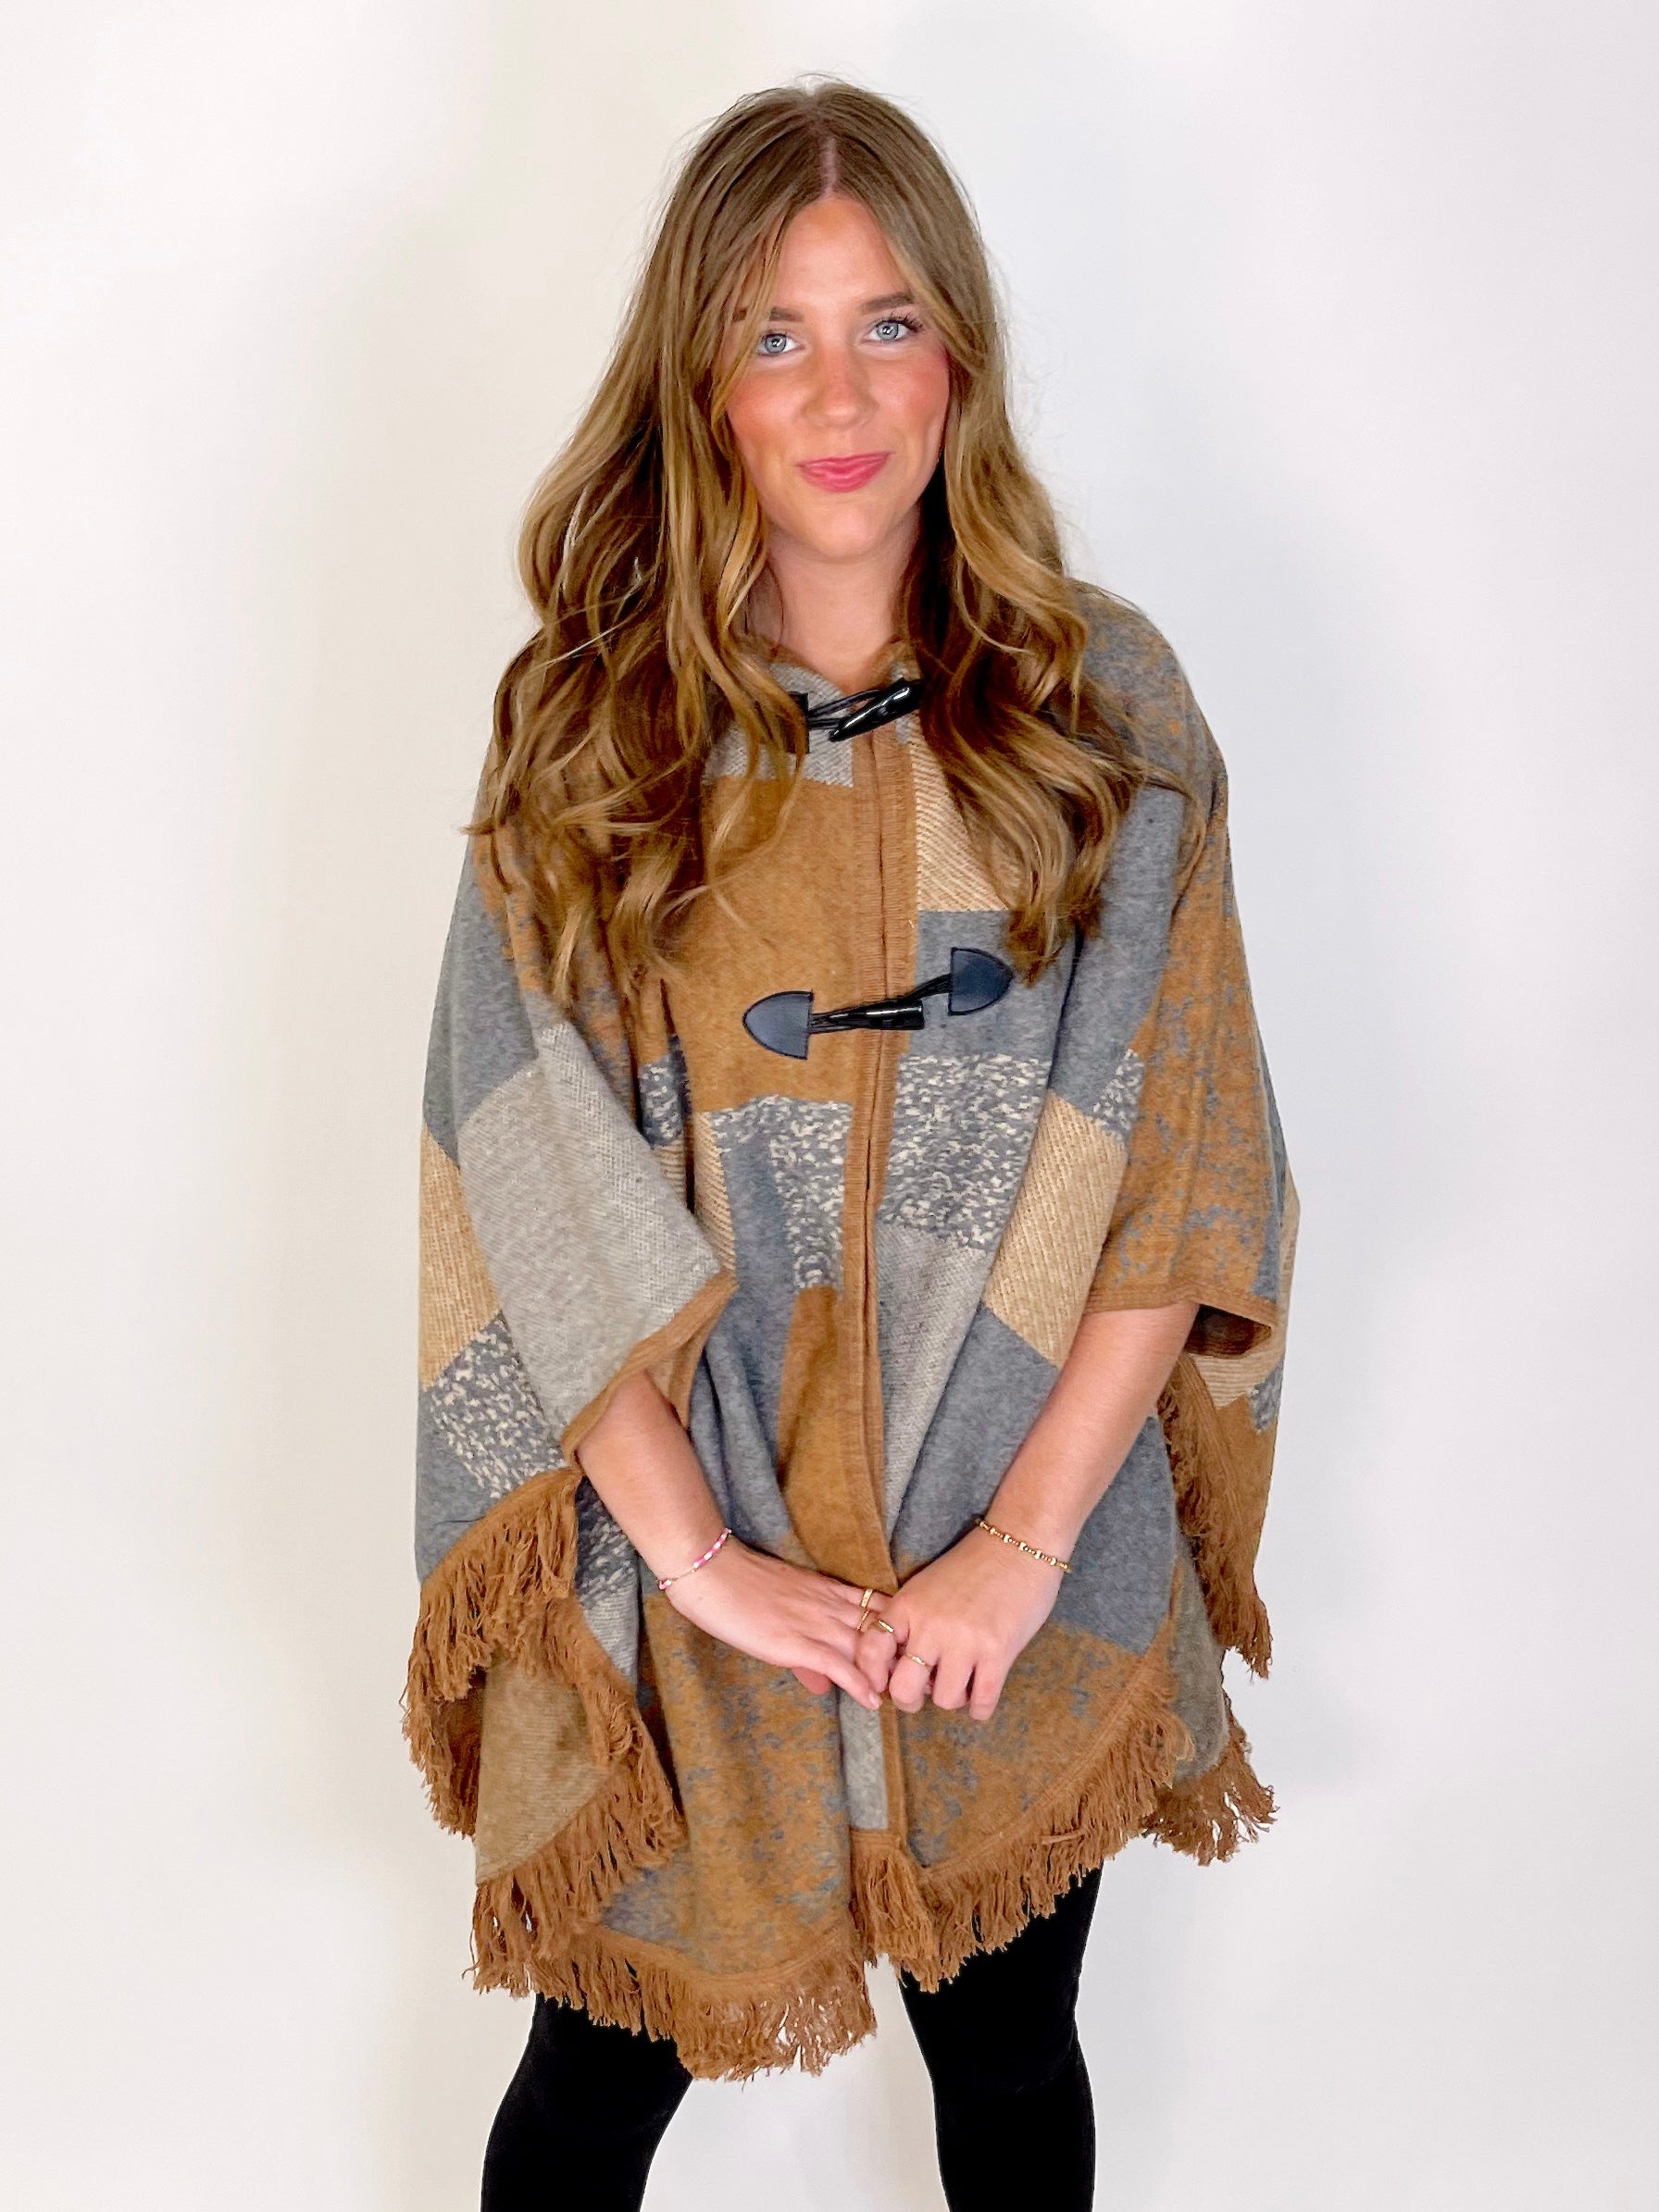 The Ramona Poncho-Poncho-Coco + Carmen-The Village Shoppe, Women’s Fashion Boutique, Shop Online and In Store - Located in Muscle Shoals, AL.